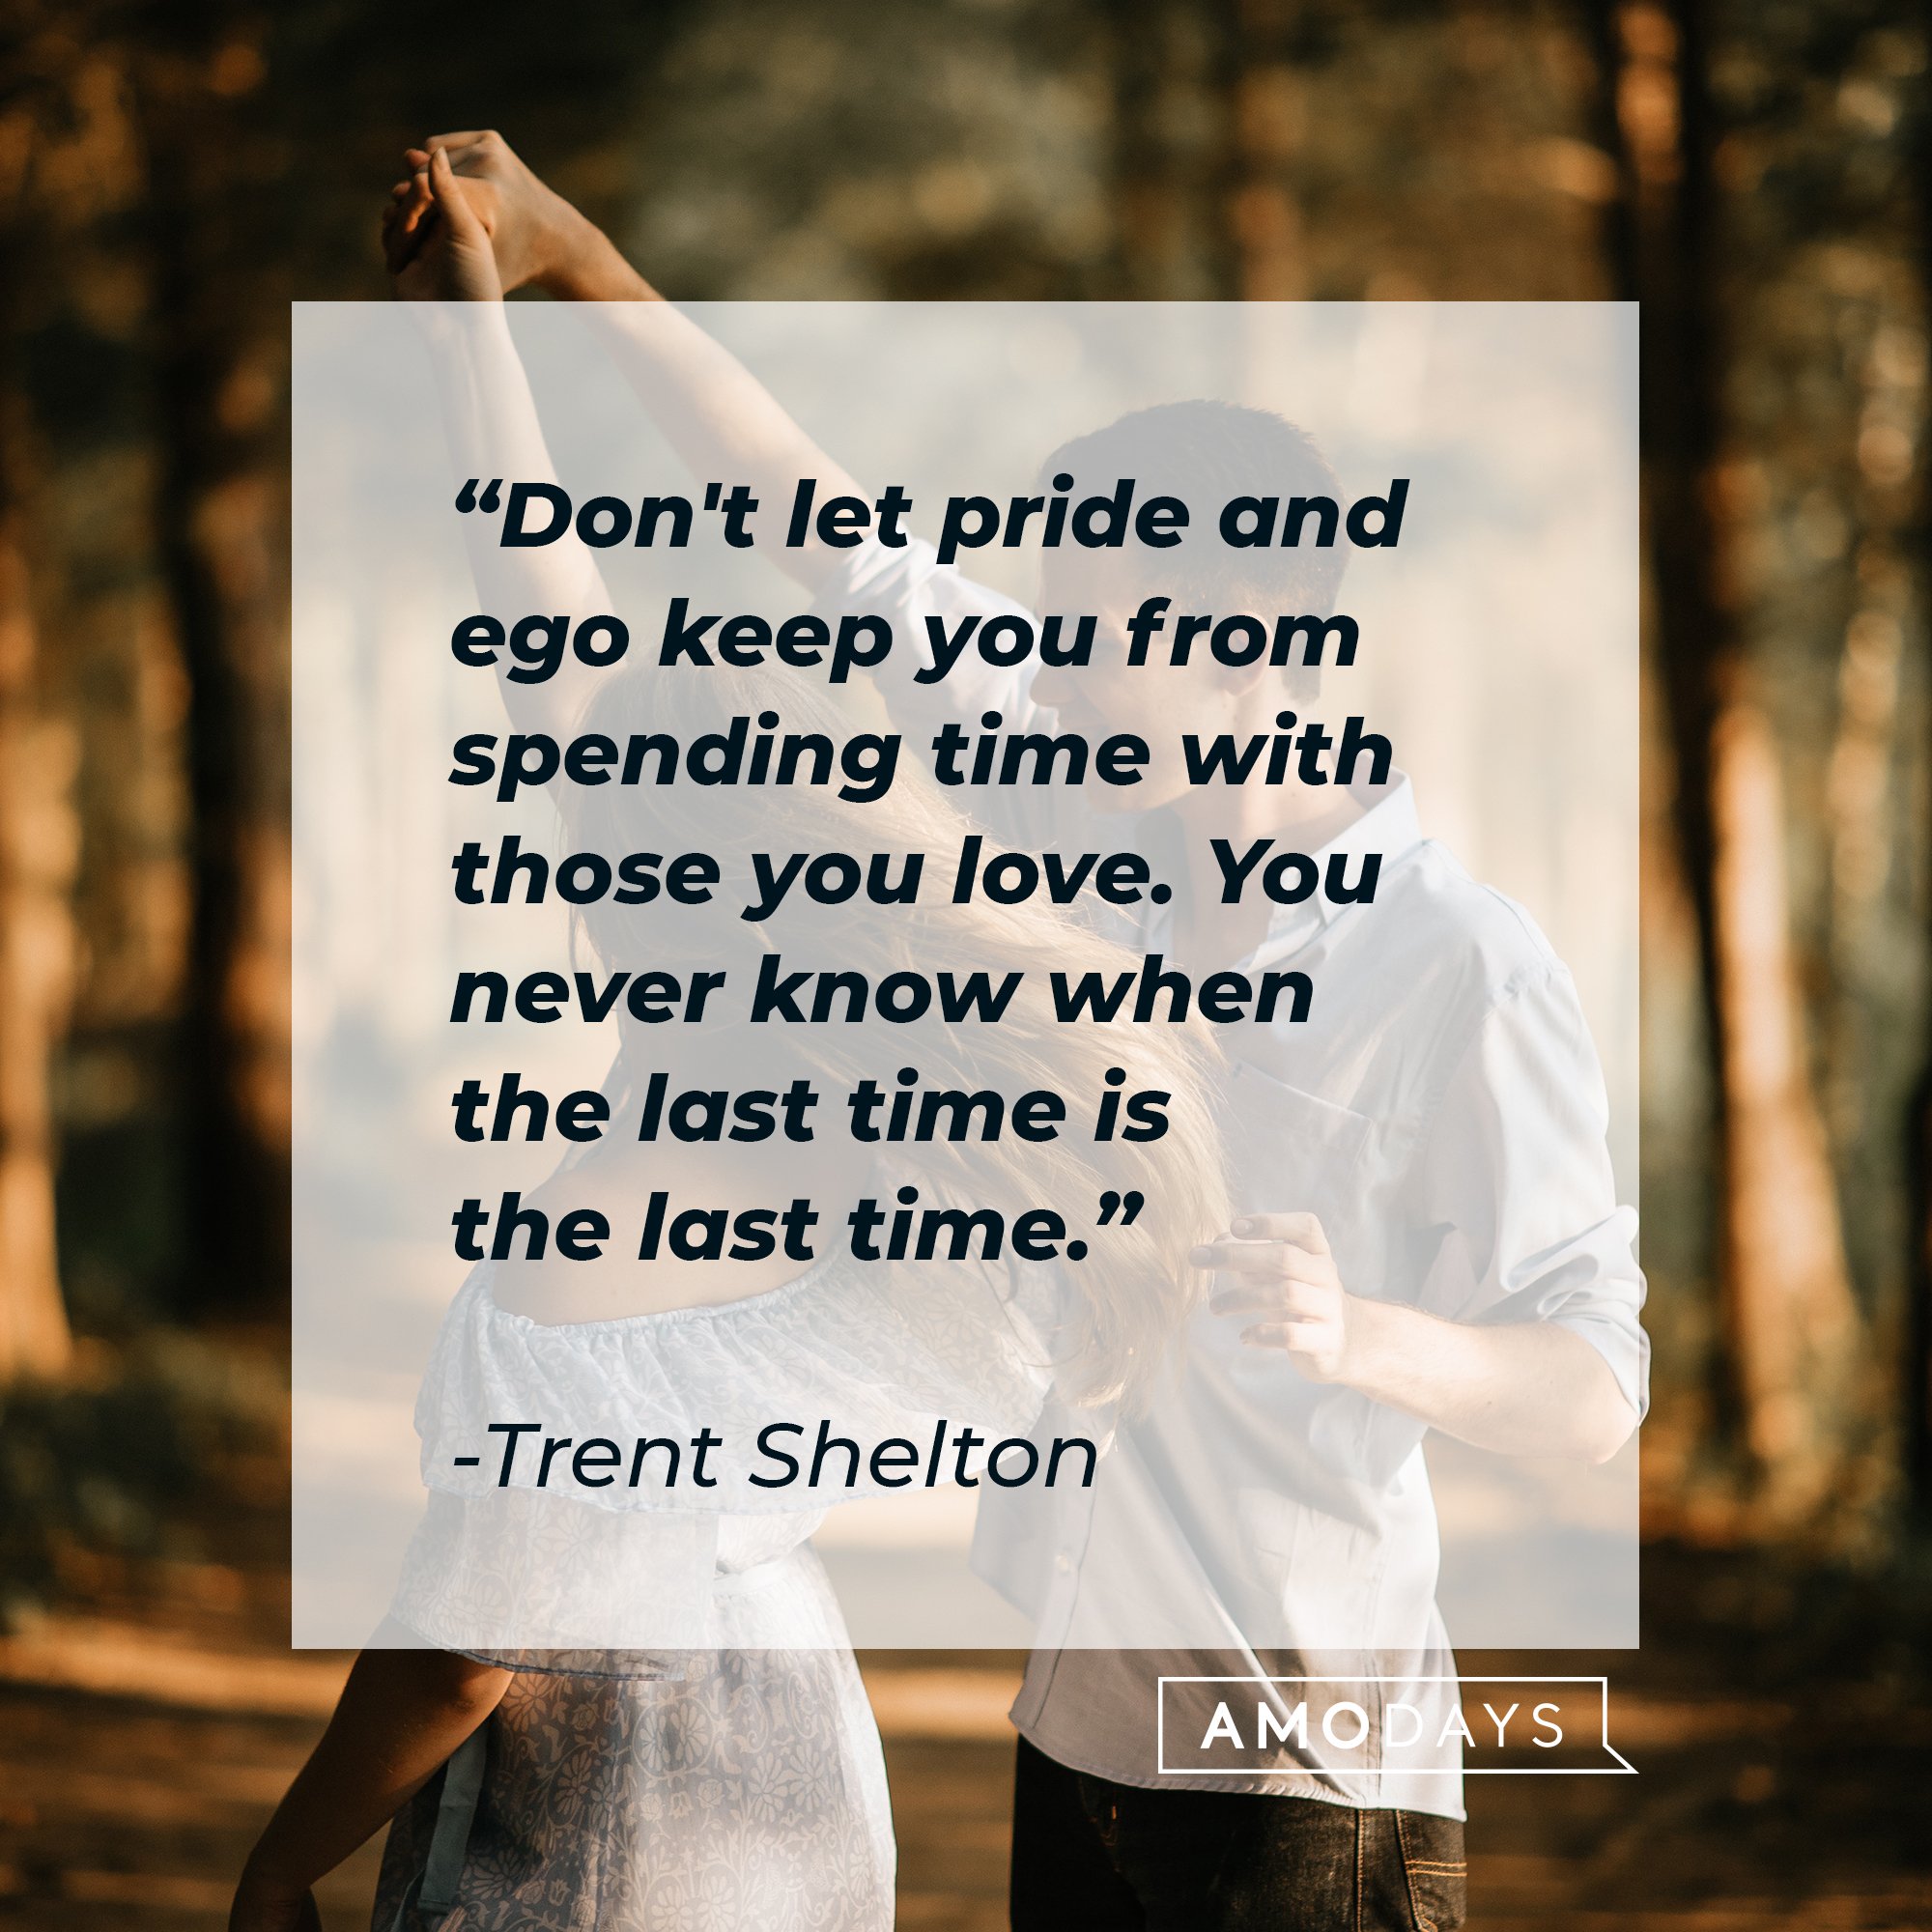  Trent Shelton's quote: "Don't let pride and ego keep you from spending time with those you love. You never know when the last time is the last time." | Image: AmoDays